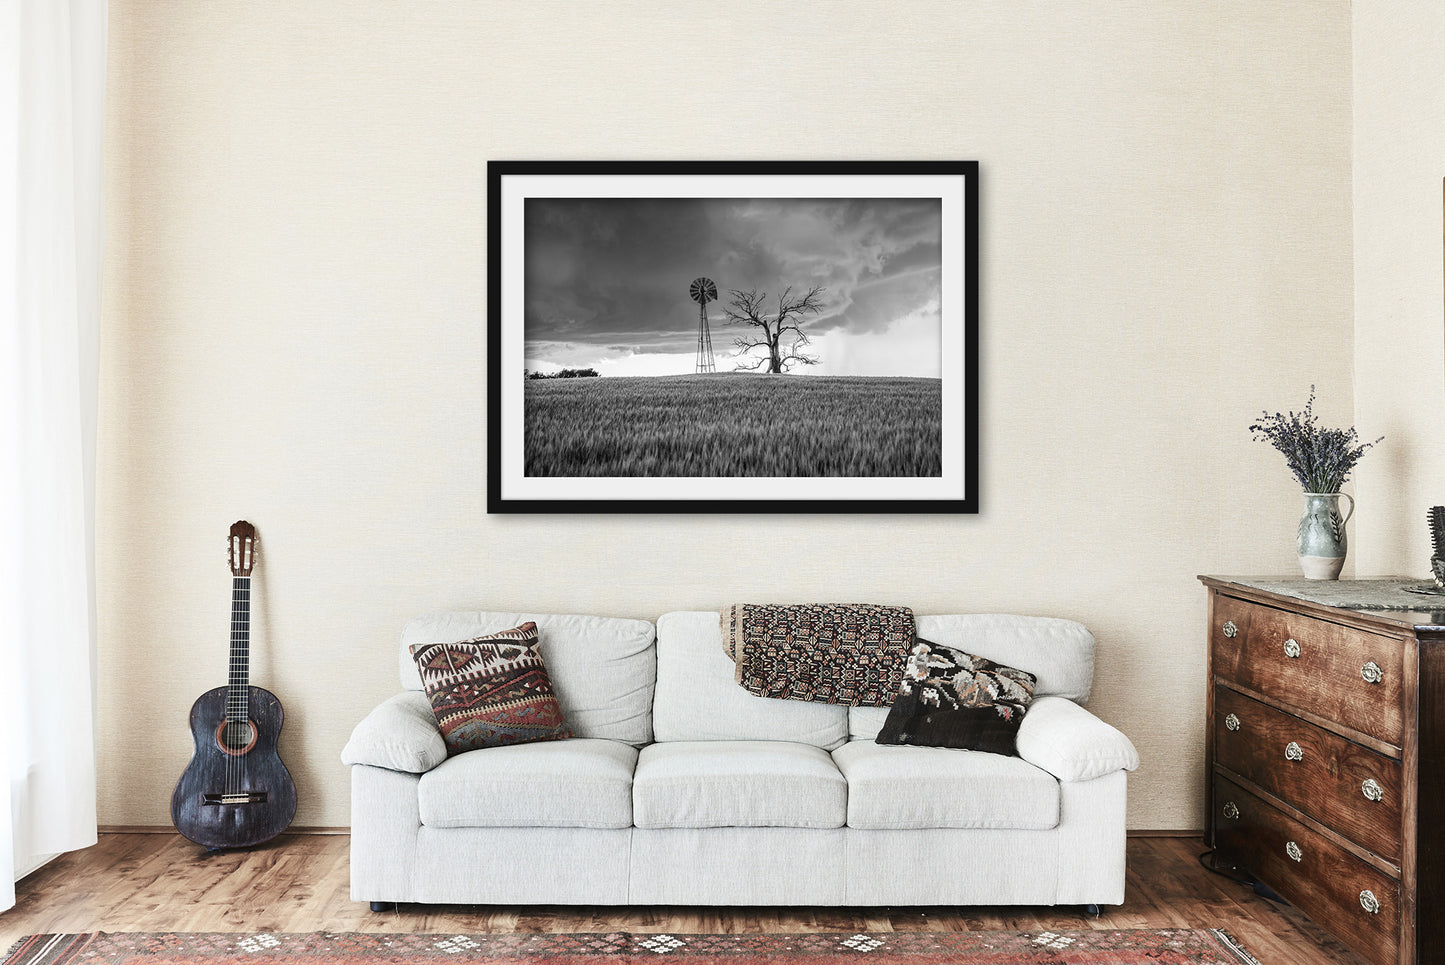 Country Framed and Matted Print - Picture of Windmill and Dead Tree in Wheat Field on Stormy Day in Oklahoma - Farmhouse Wall Art Decor